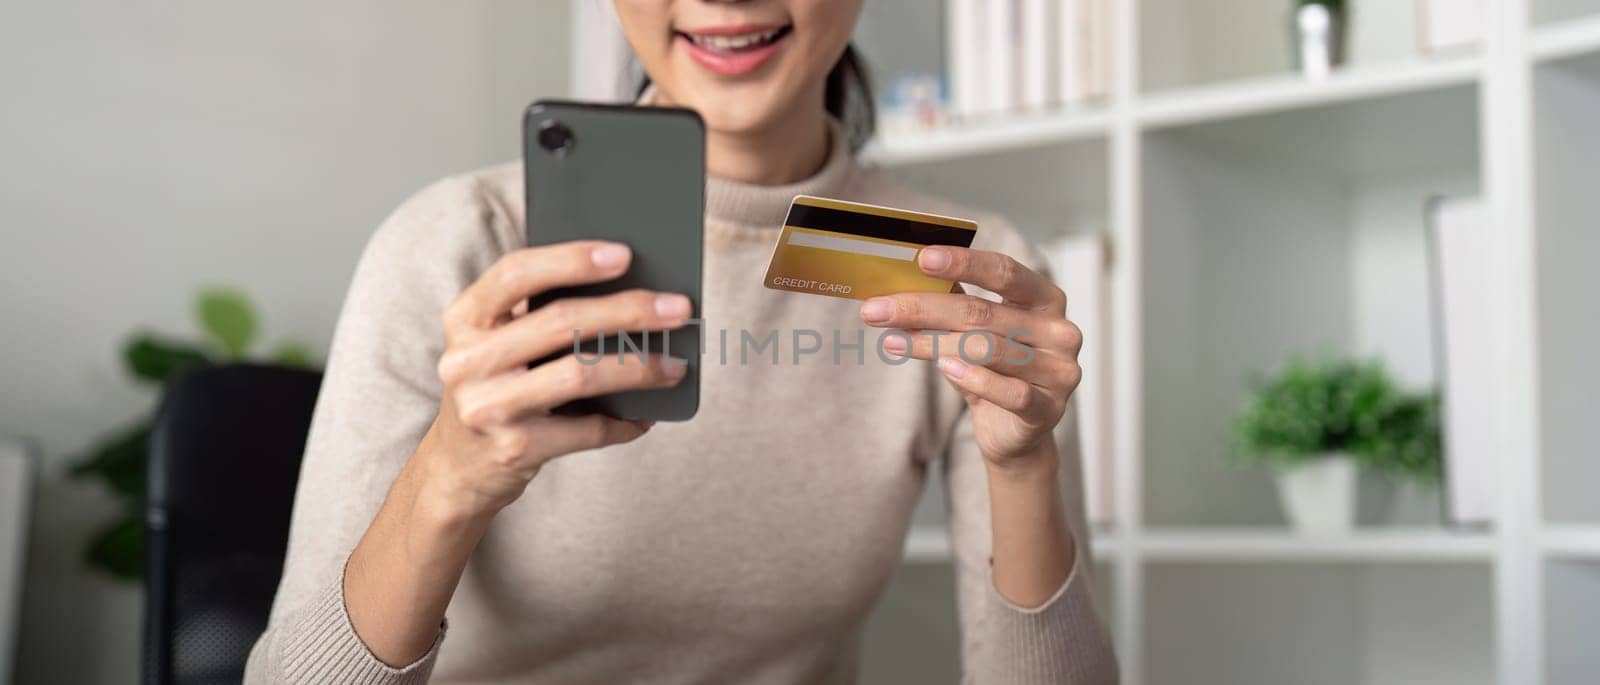 Asian female holding smartphone and credit card, using mobile banking app or online shopping app by nateemee